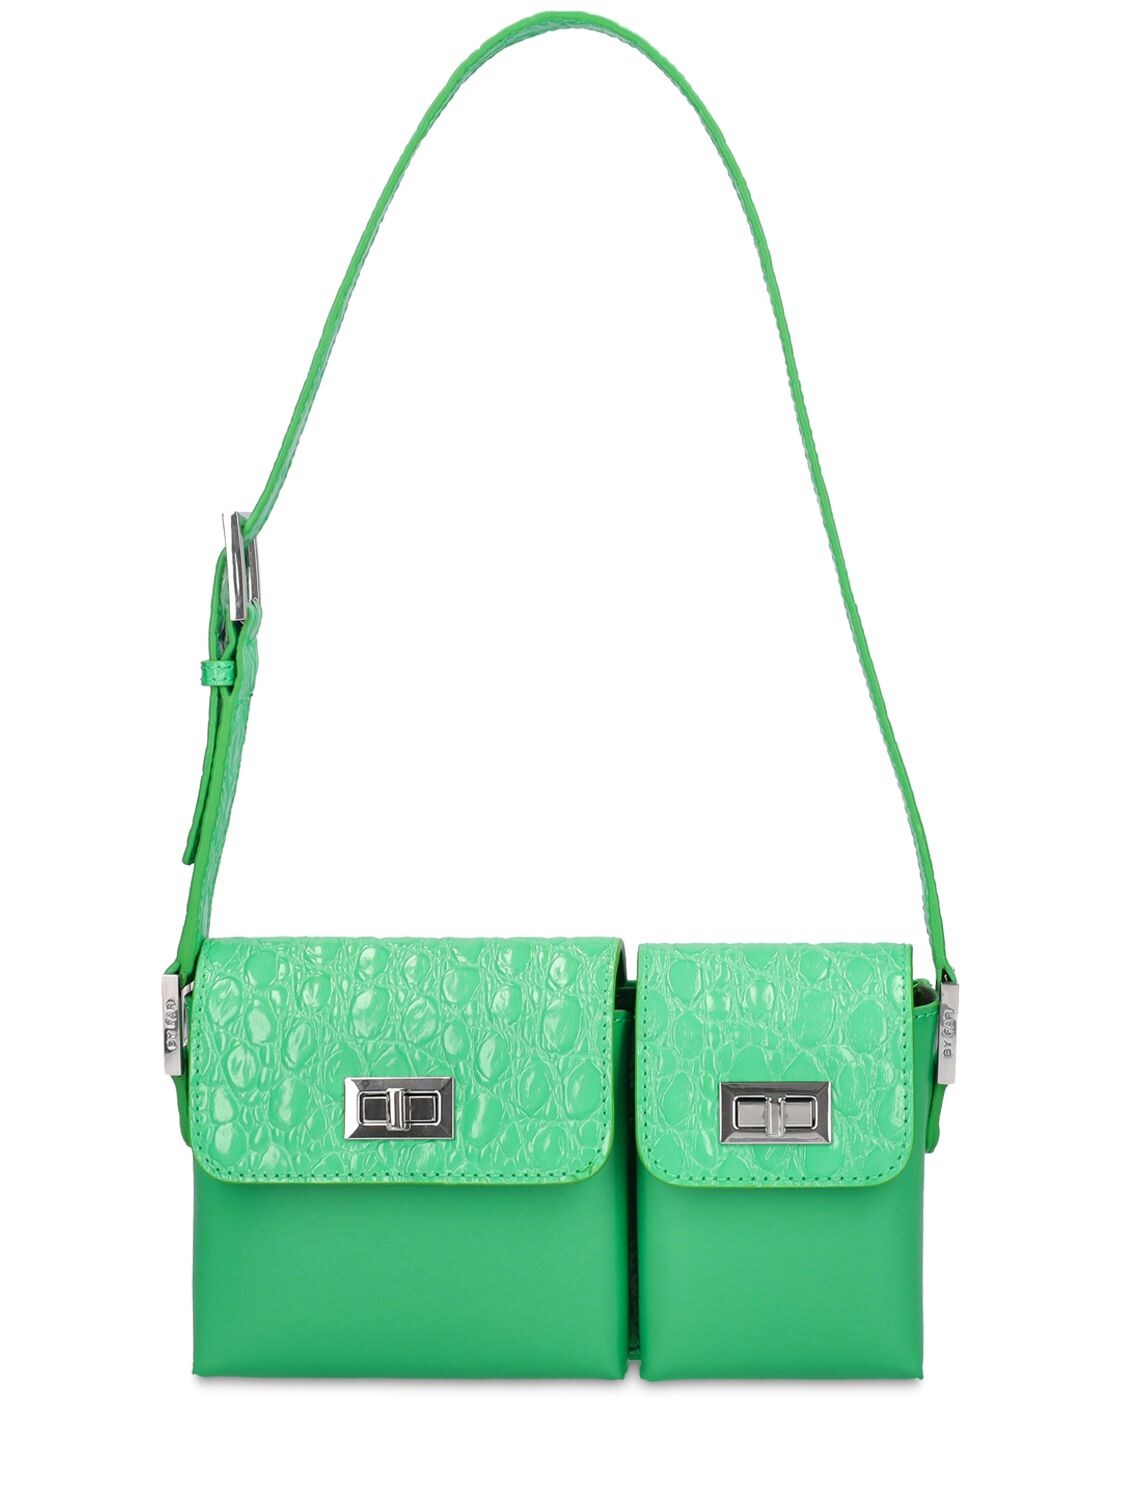 Baby Billy Croc Semi Patent Leather Bag